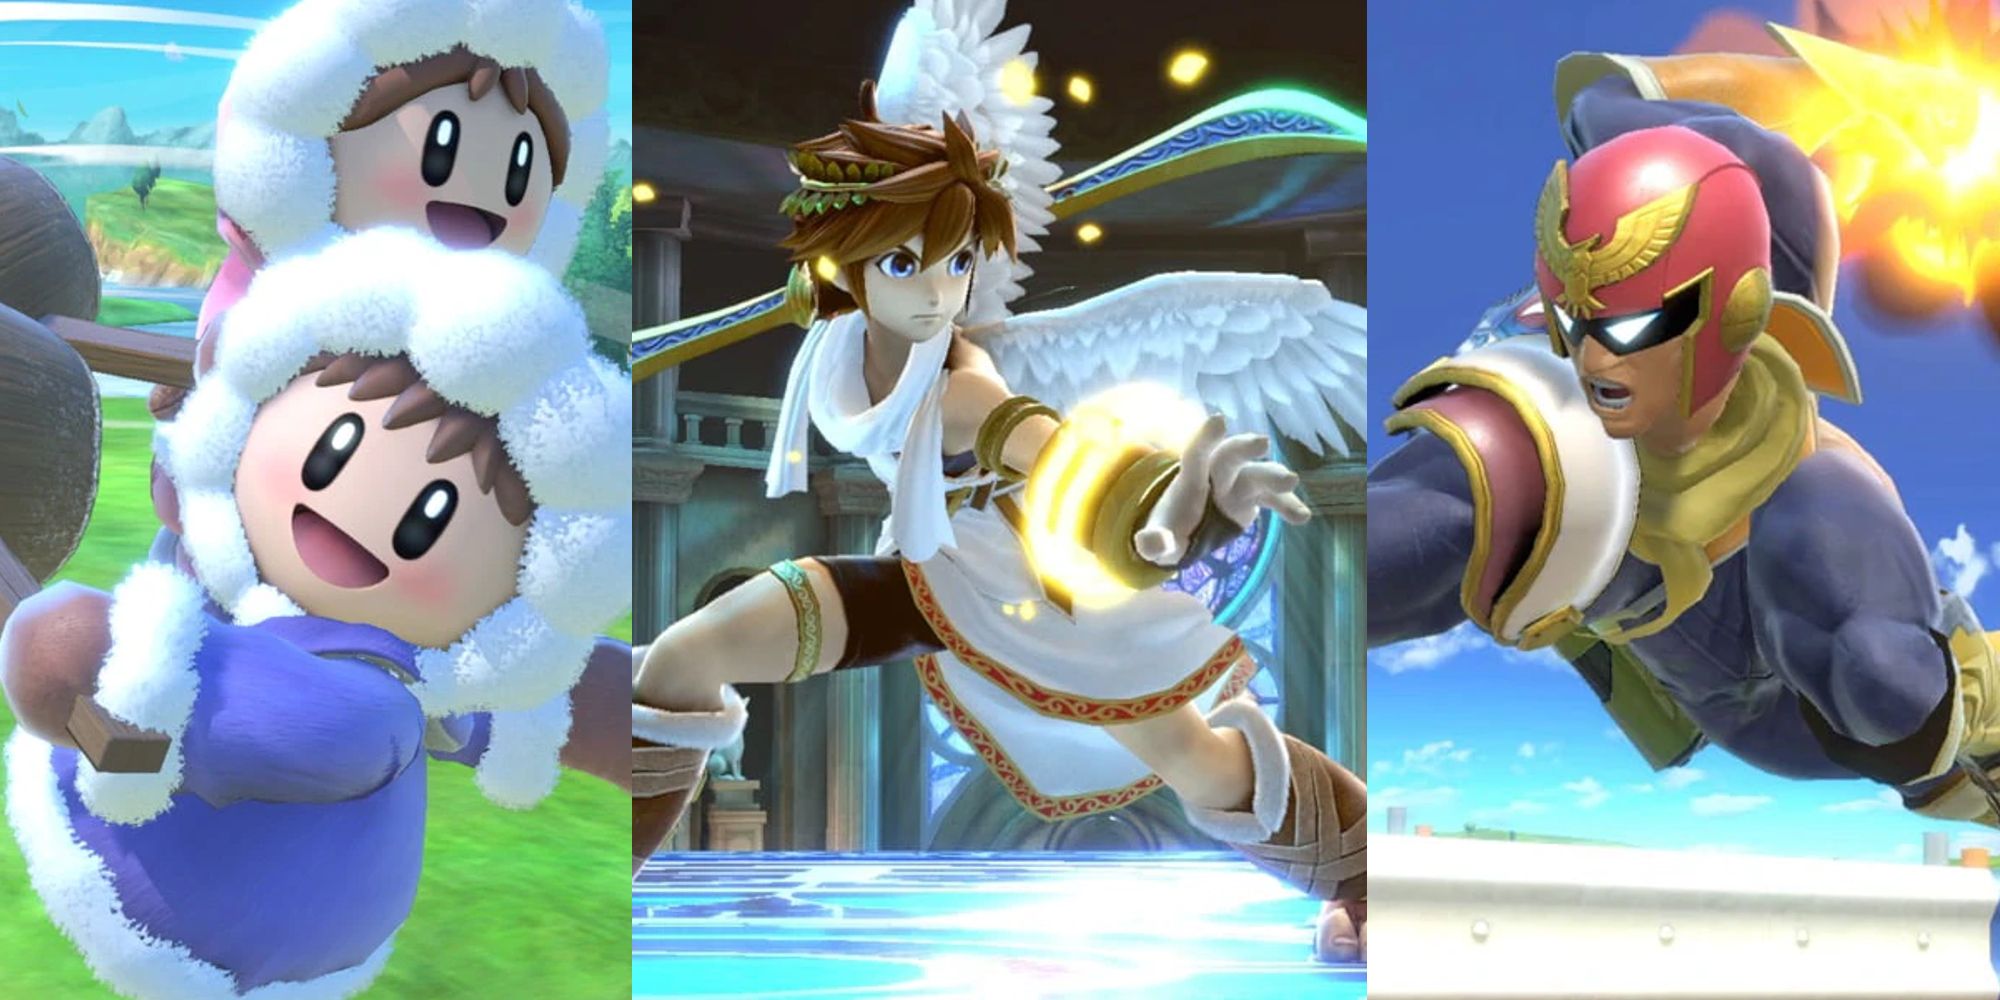 Ice Climbers spin-attacking in Ultimate; Pit striking a pose in Ultimate; Captain Falcon running with flaming fist in Ultimate